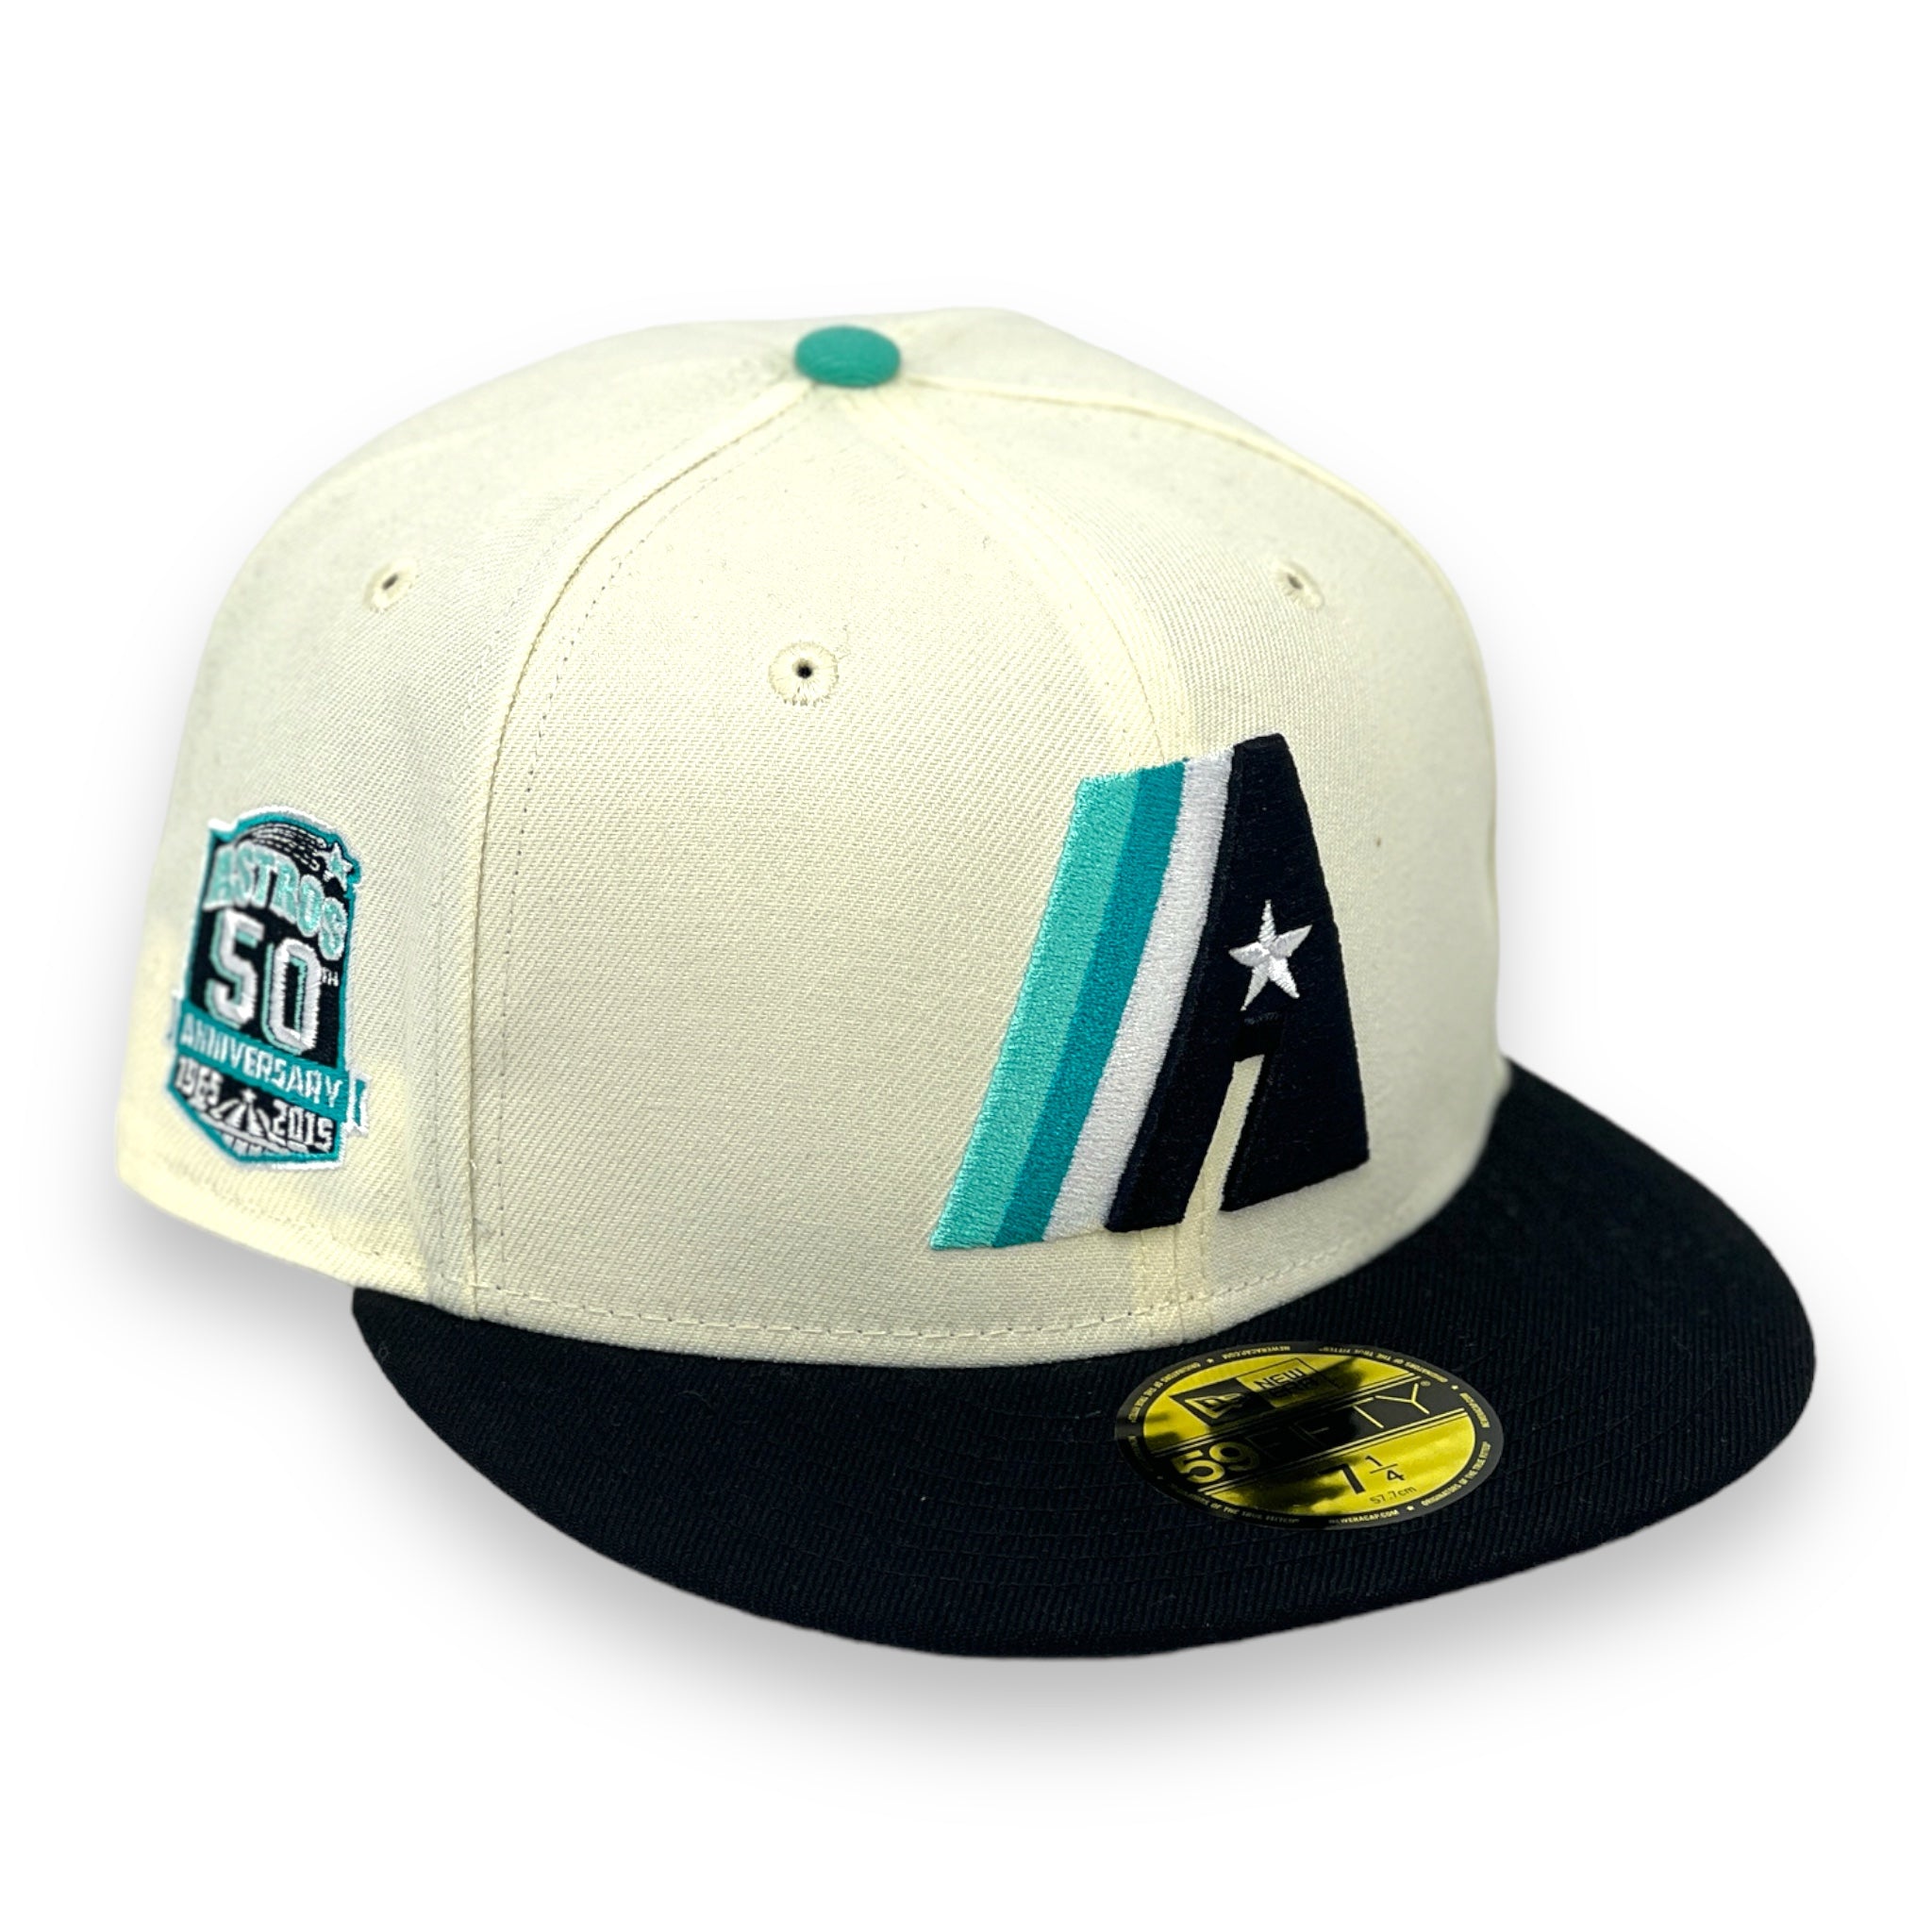 HOUSTON ASTROS (OFF-WHITE/MINT) (50TH ANNIVERSARY) NEW ERA 59FIFTY FITTED (TEAL UNDERVISOR)